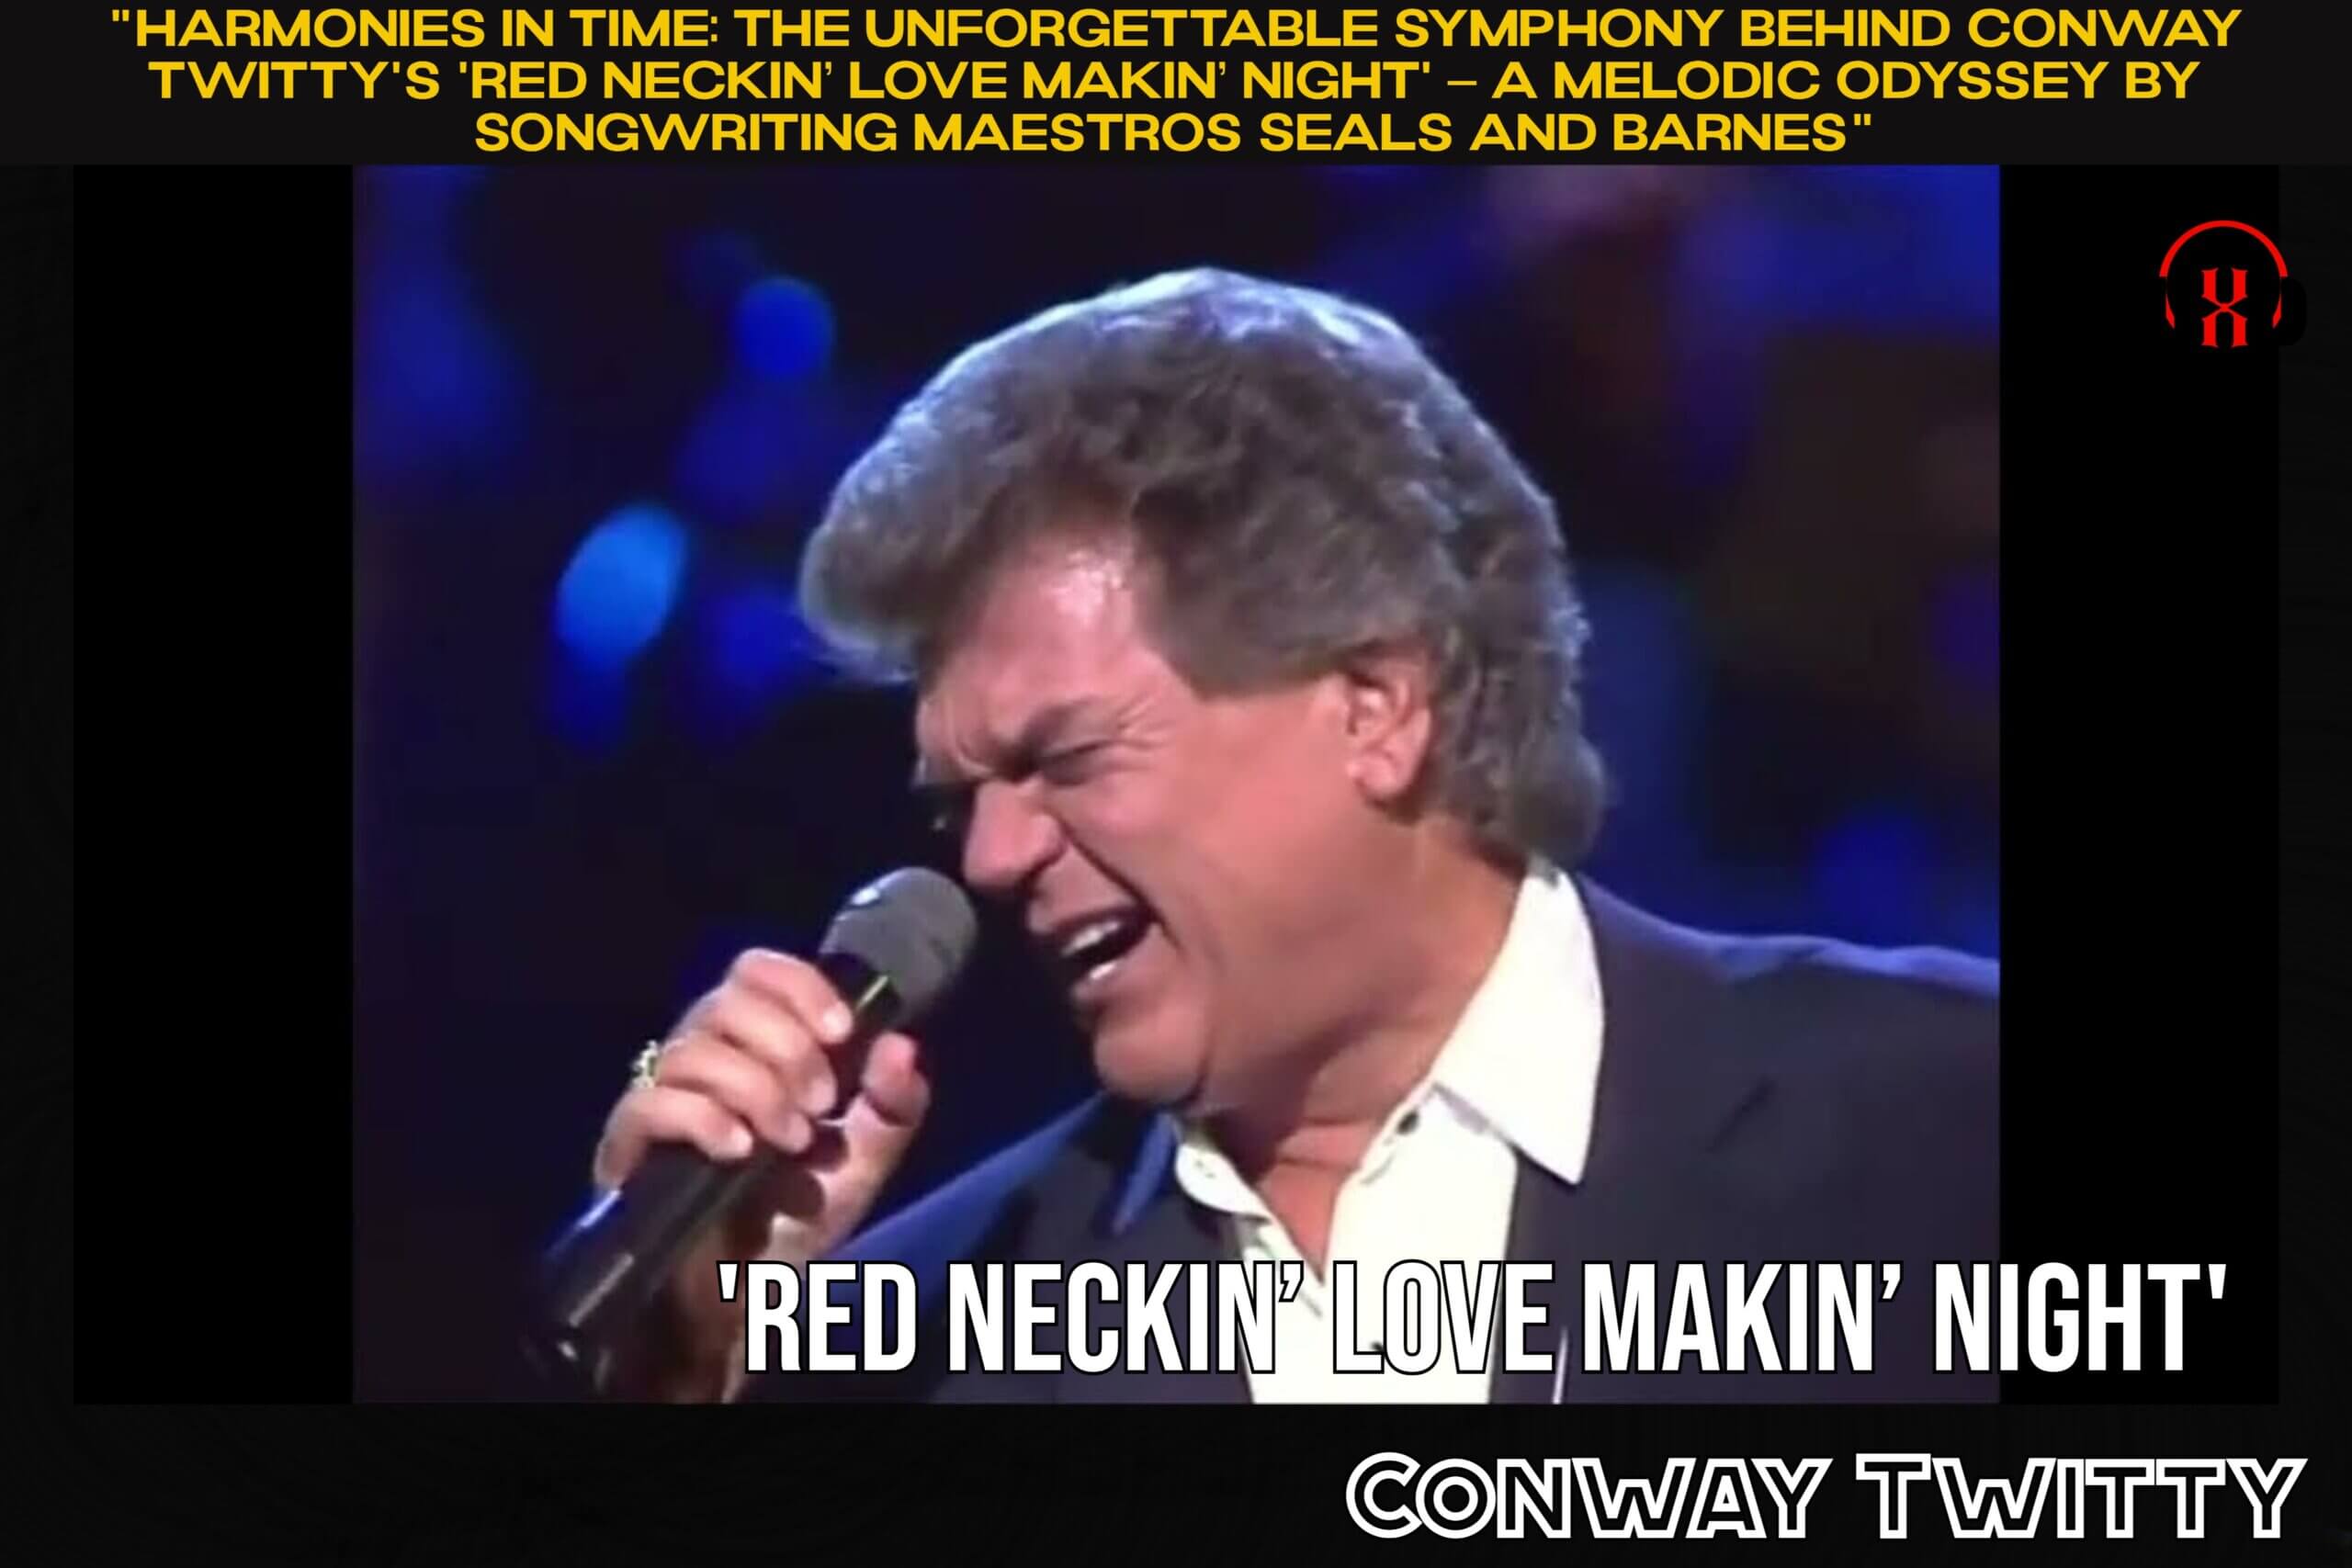 “Harmonies in Time: The Unforgettable Symphony Behind Conway Twitty’s ‘Red Neckin’ Love Makin’ Night’ – A Melodic Odyssey by Songwriting Maestros Seals and Barnes”